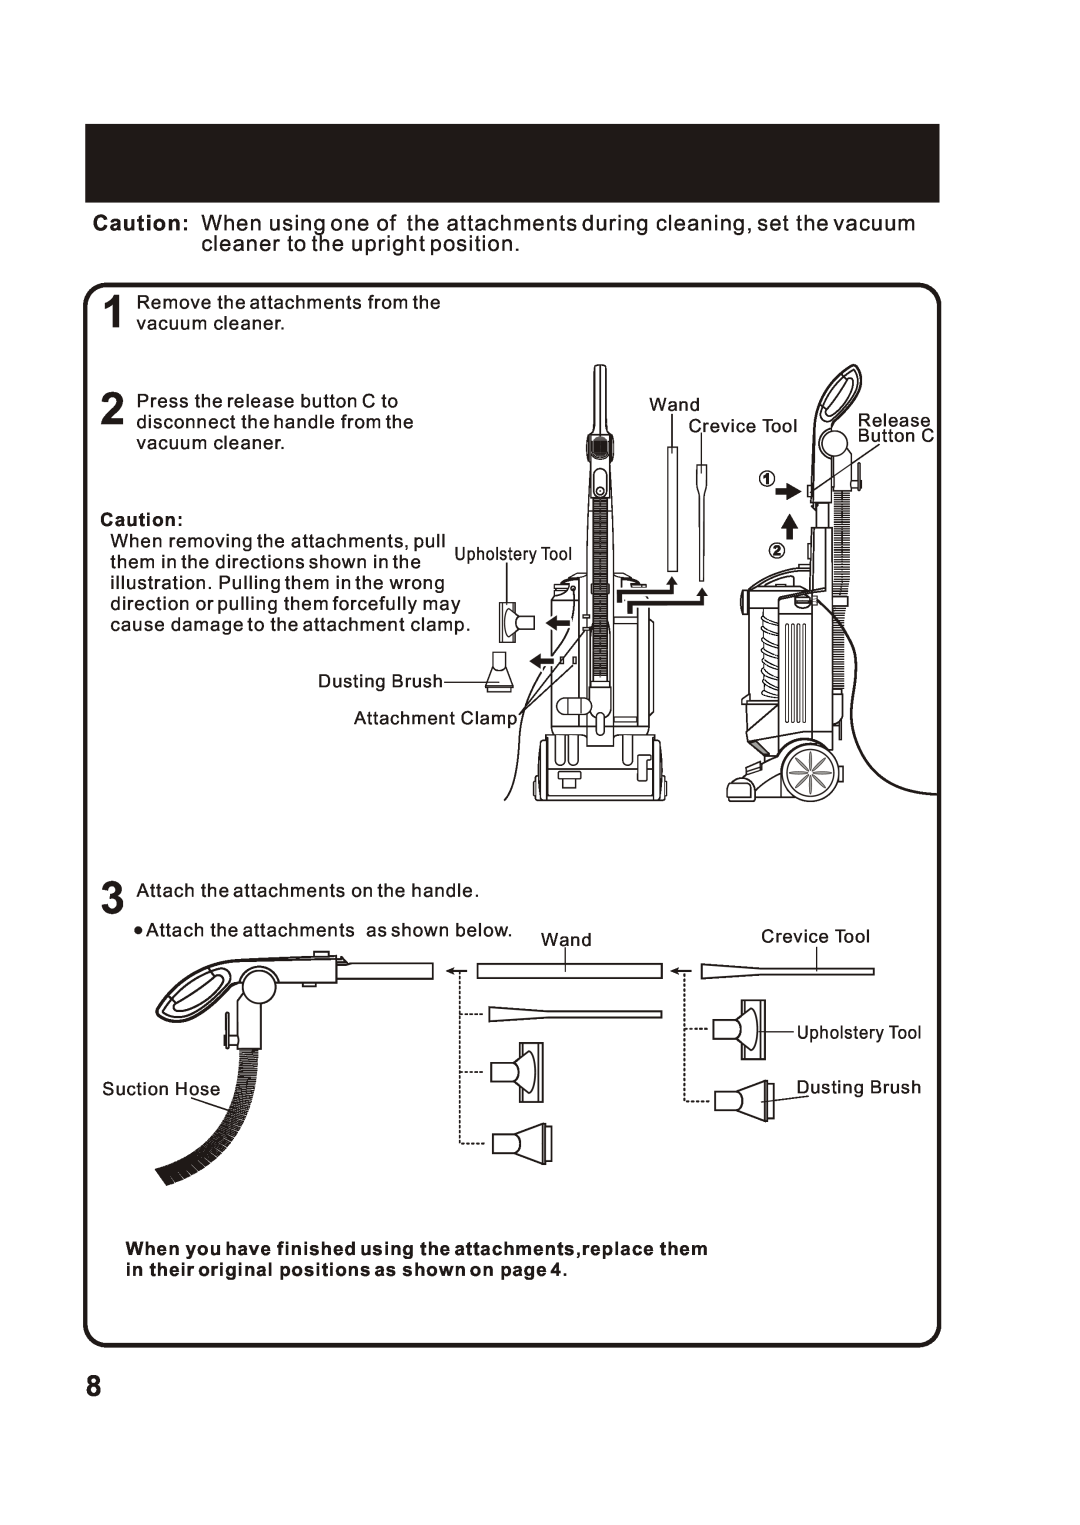 Fantom Vacuum FM780 instruction manual Remove the attachments from the 1 vacuum cleaner 